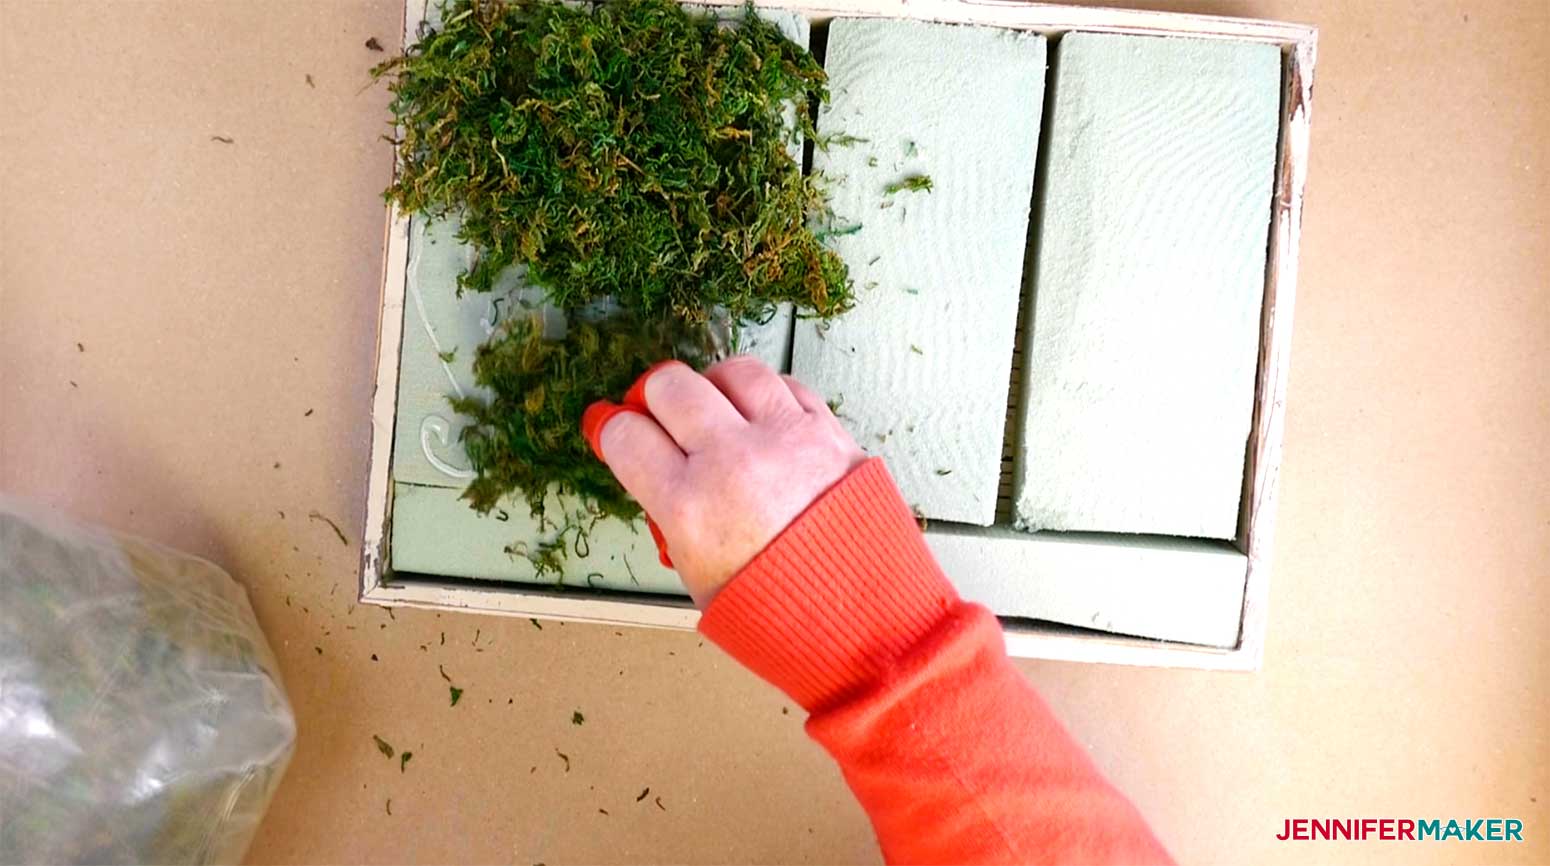 Push moss into the hot glue on the floral foam for my paper succulents project